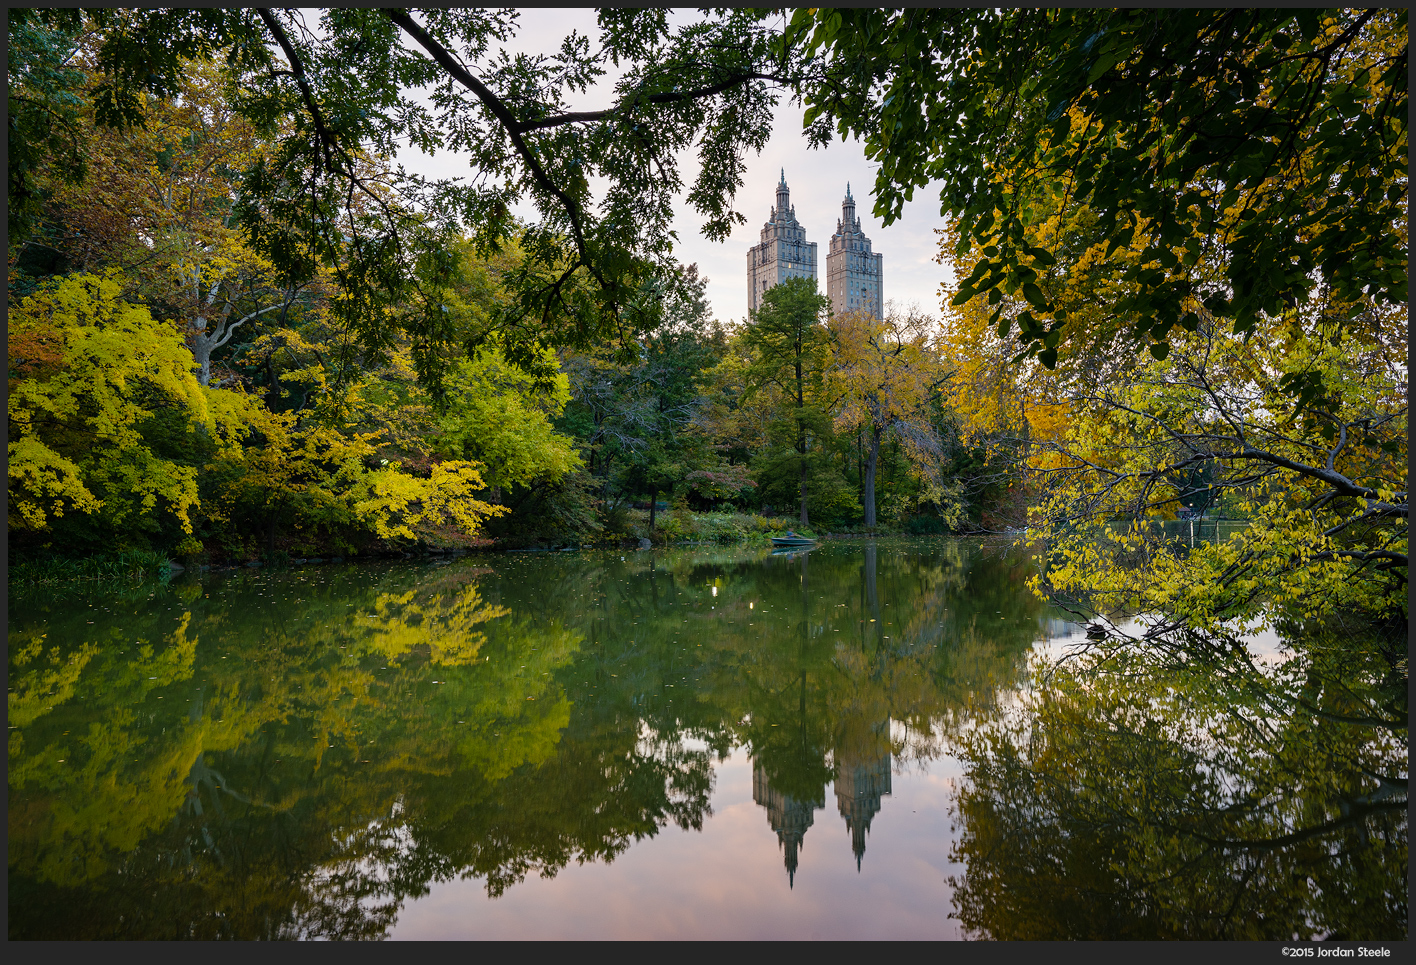 Central Park - Sony A7 II with Zeiss FE 16-35mm f/4 @